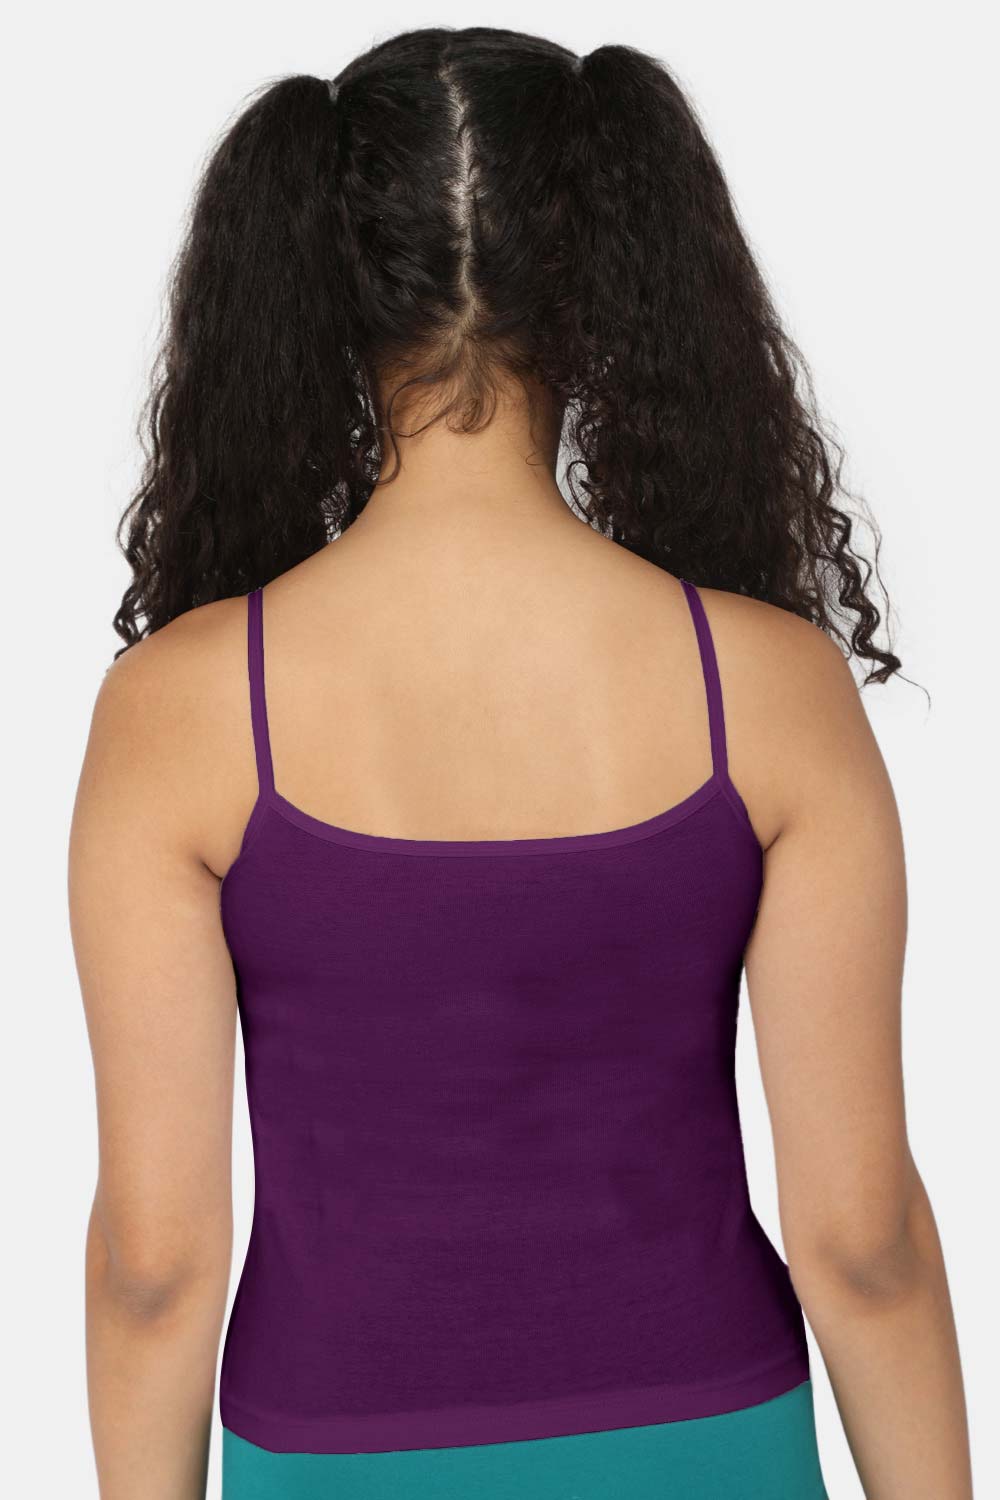 Intimacy Camisole-Slip Special Combo Pack - In02 - Pack of 3 - C42